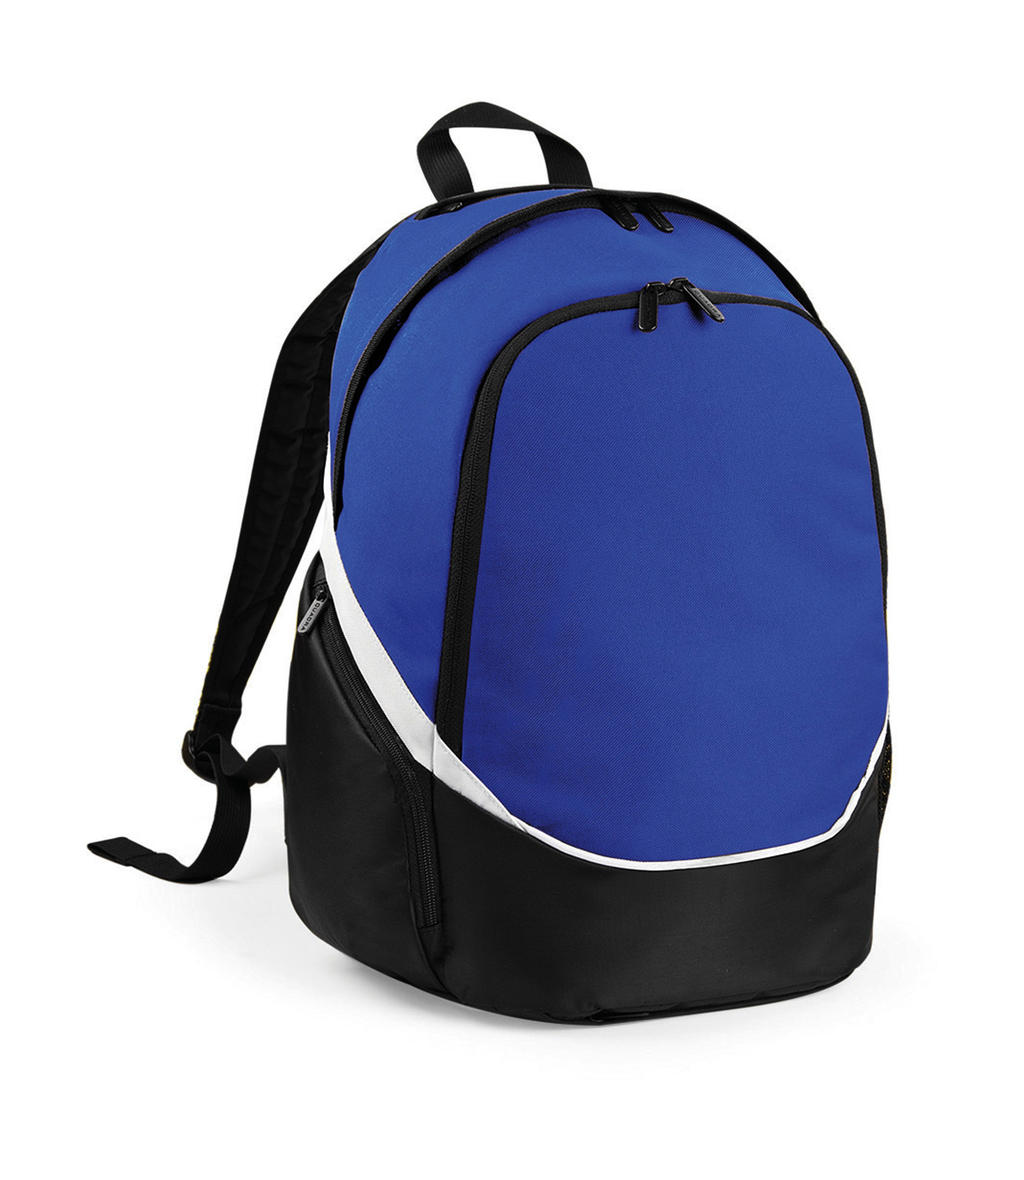  Pro Team Backpack in Farbe Bright Royal/Black/White